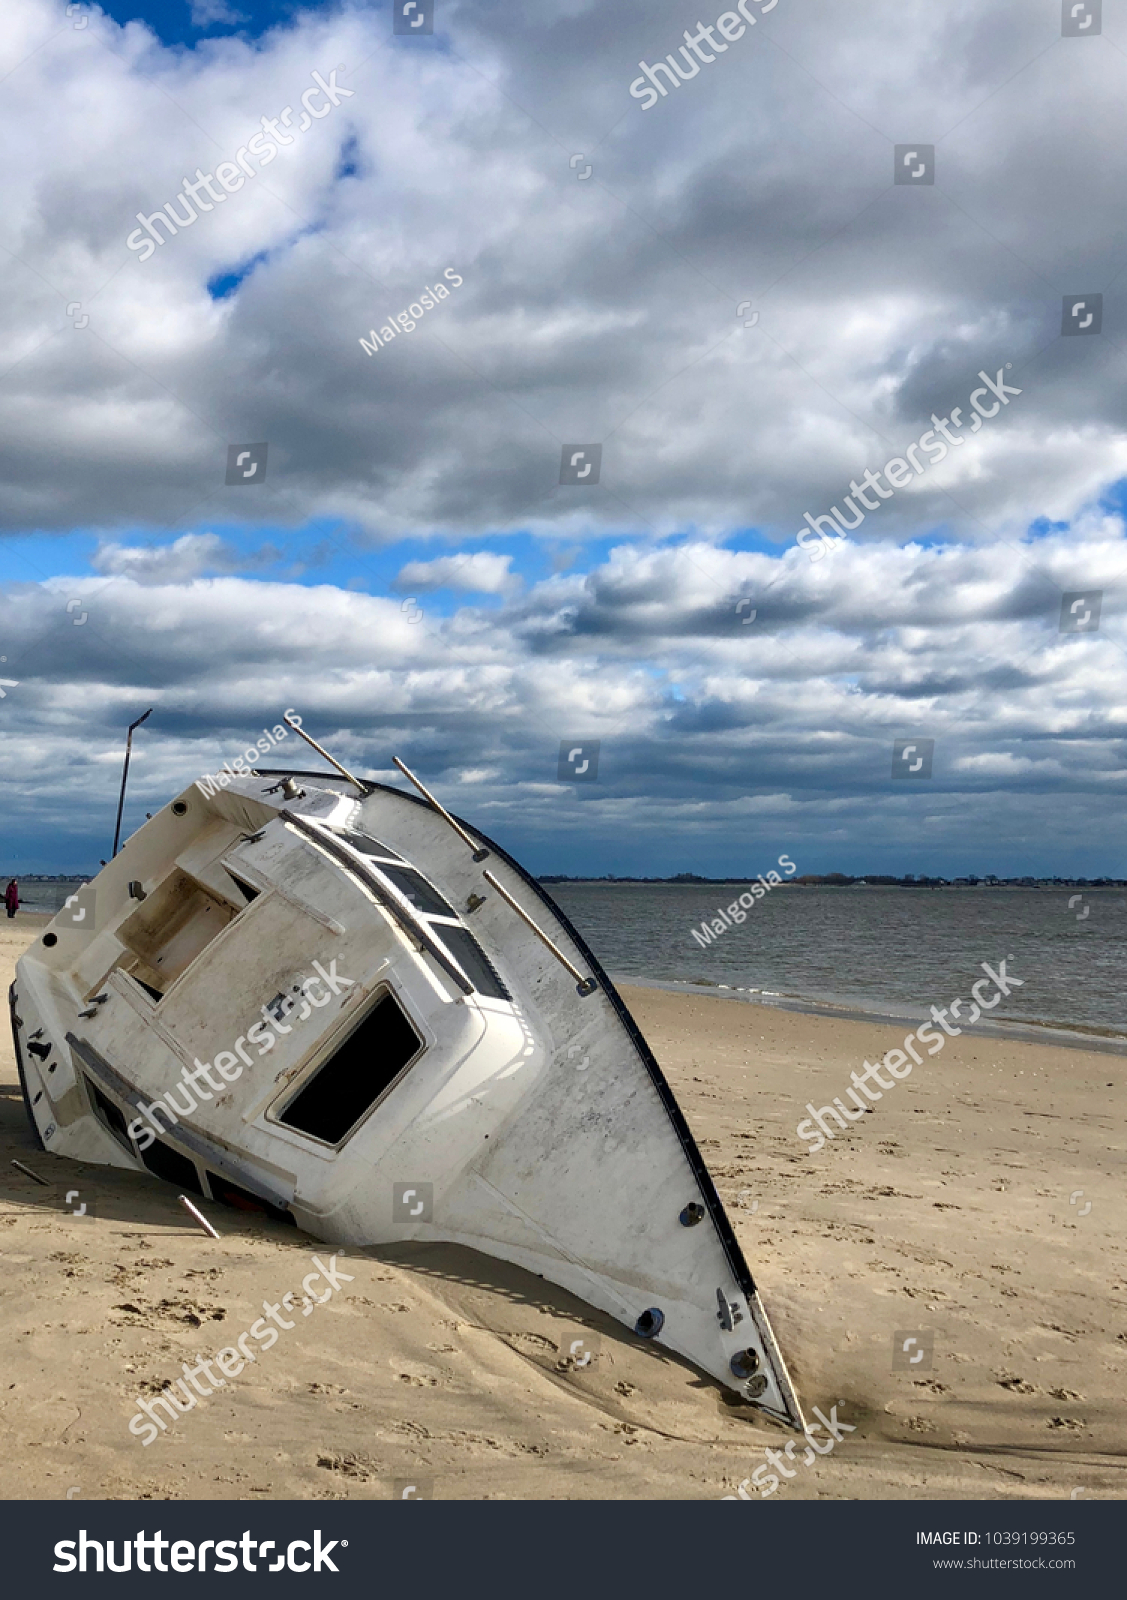 Overturned boat washed ashore by strong storm on Plumb Beach, Brooklyn, NY.